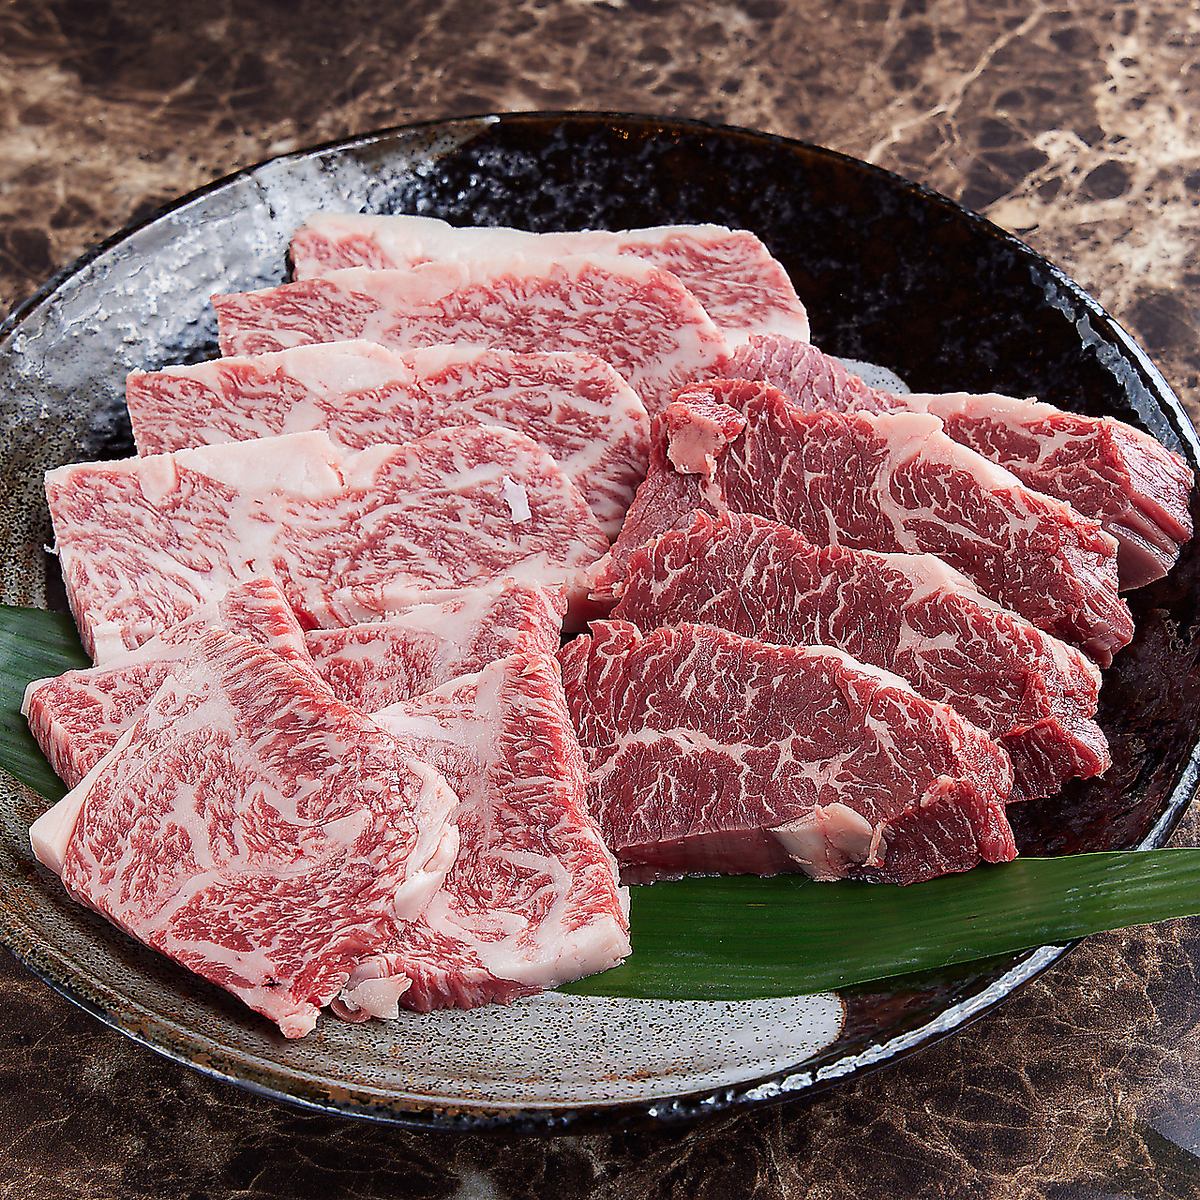 We buy only A5 rank Wagyu beef and offer a variety of parts♪